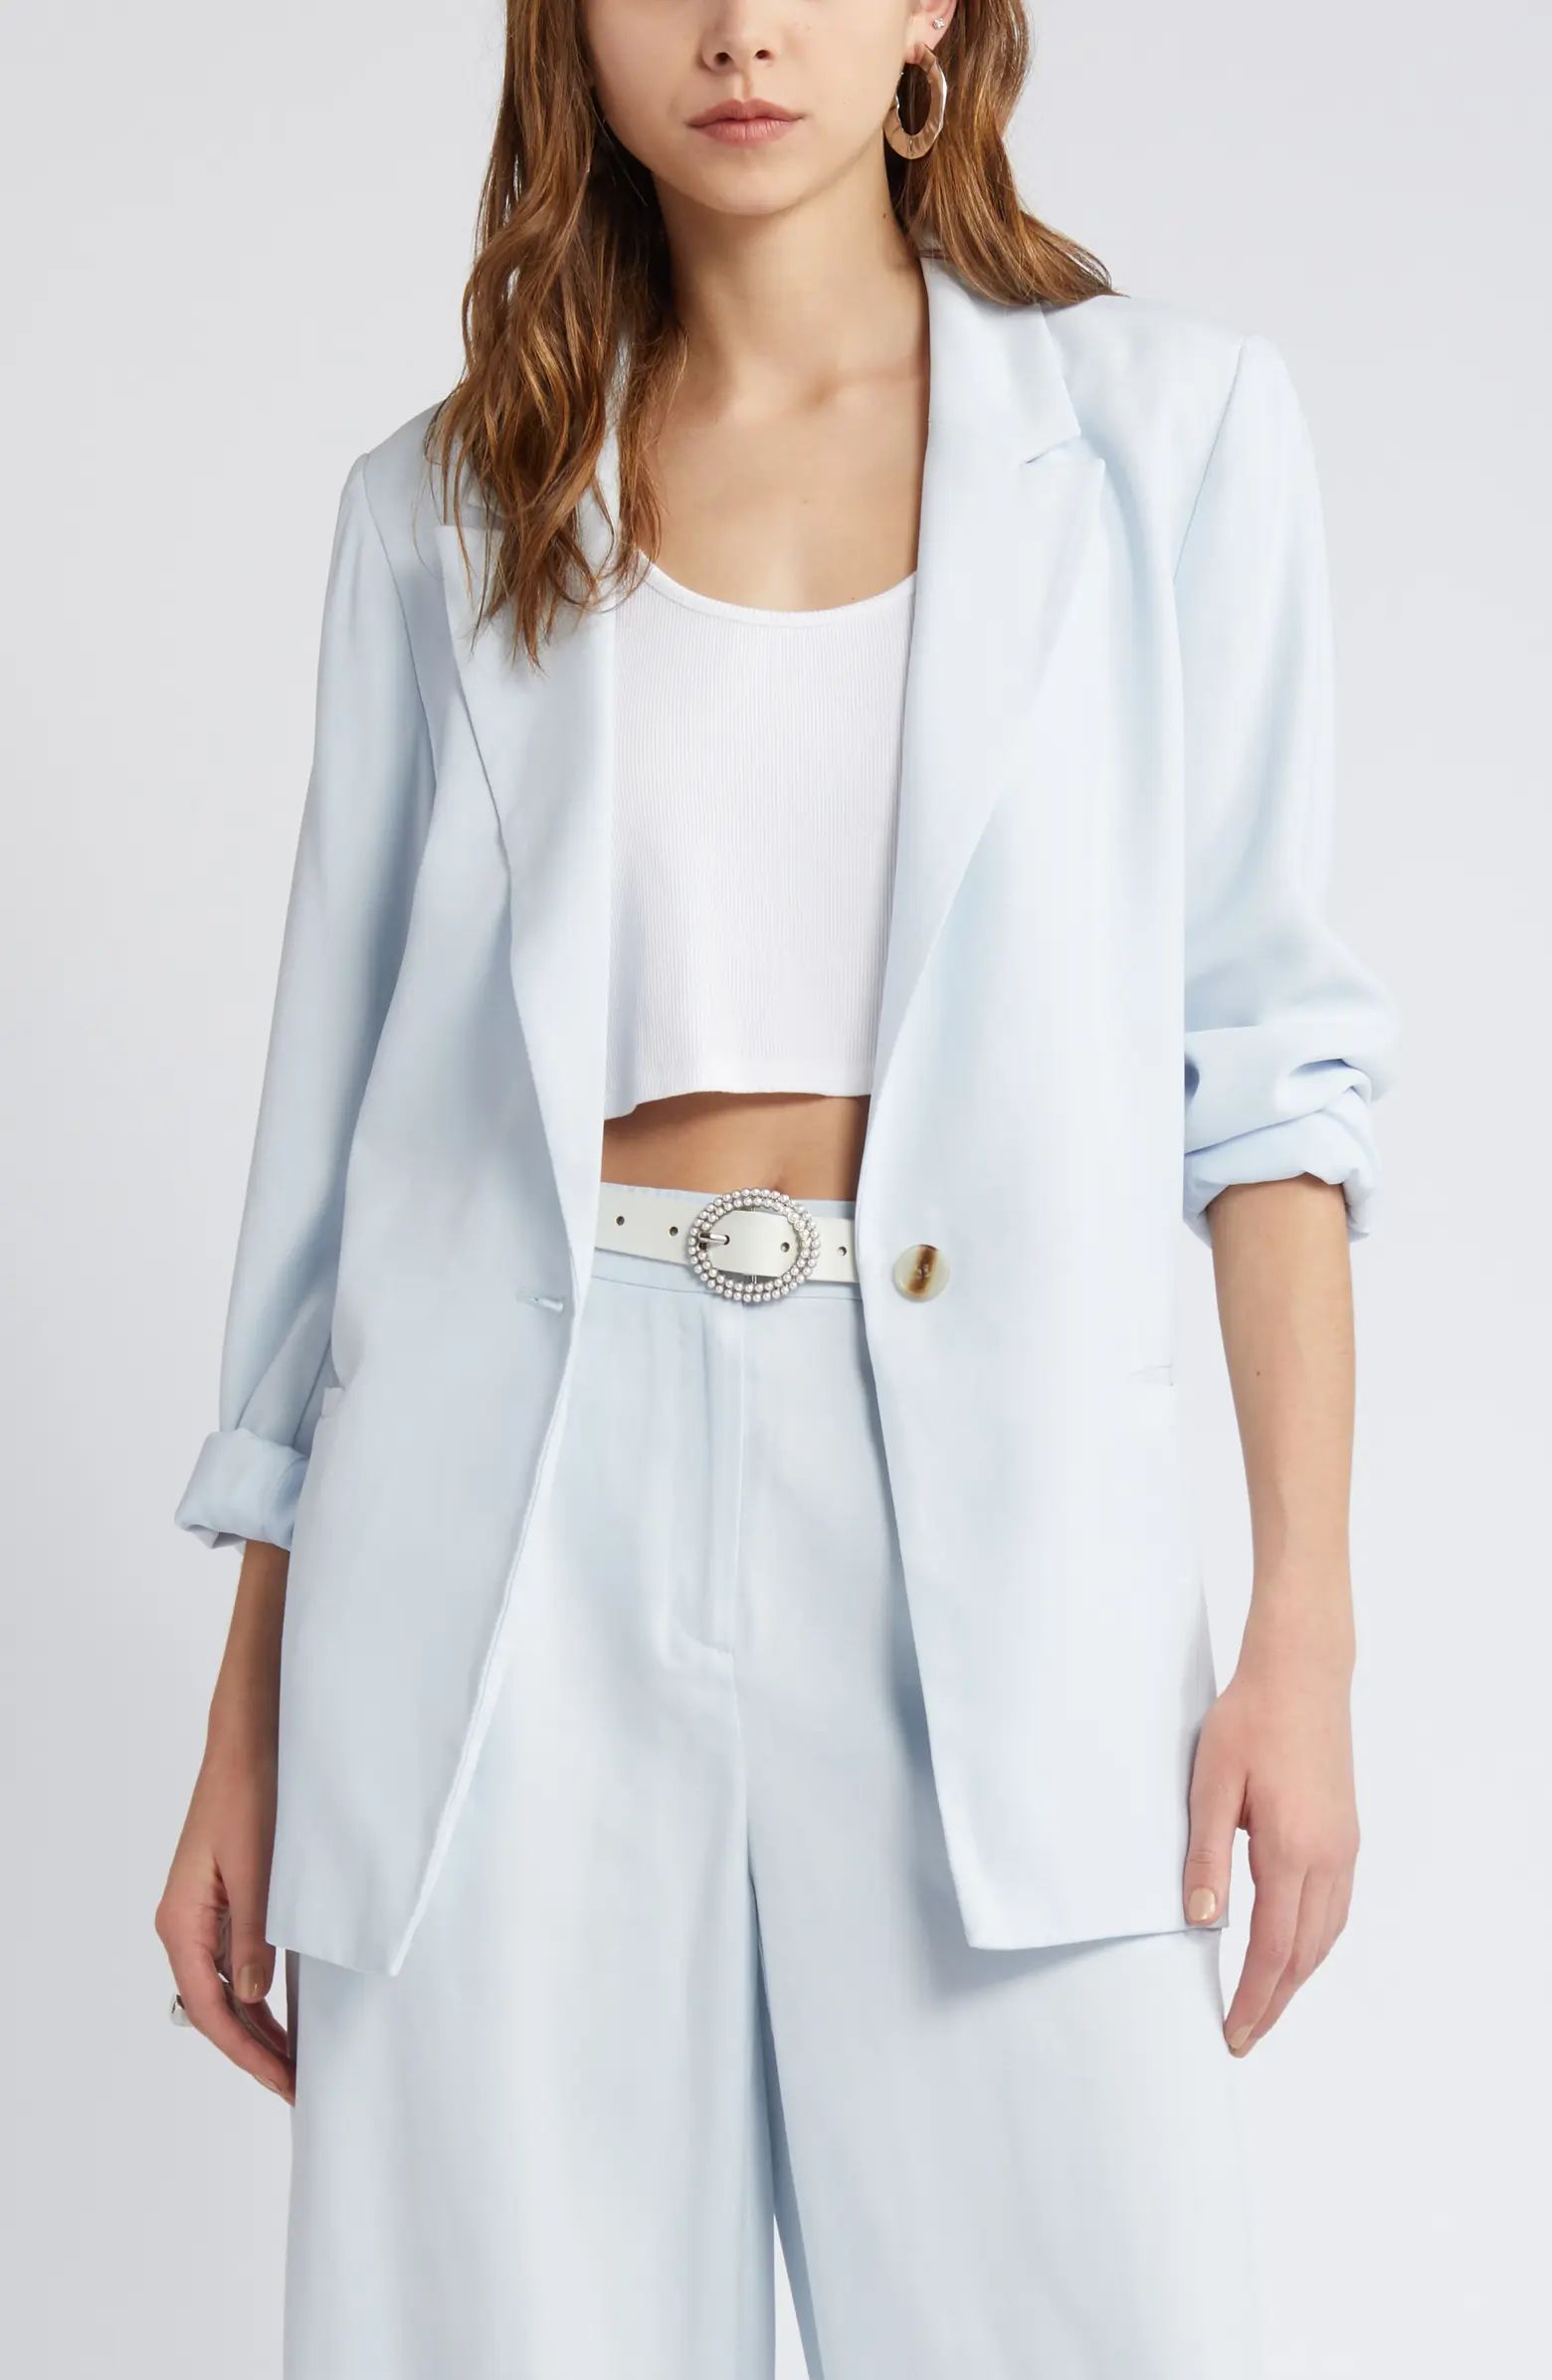 Relaxed Fit Blazer | Nordstrom